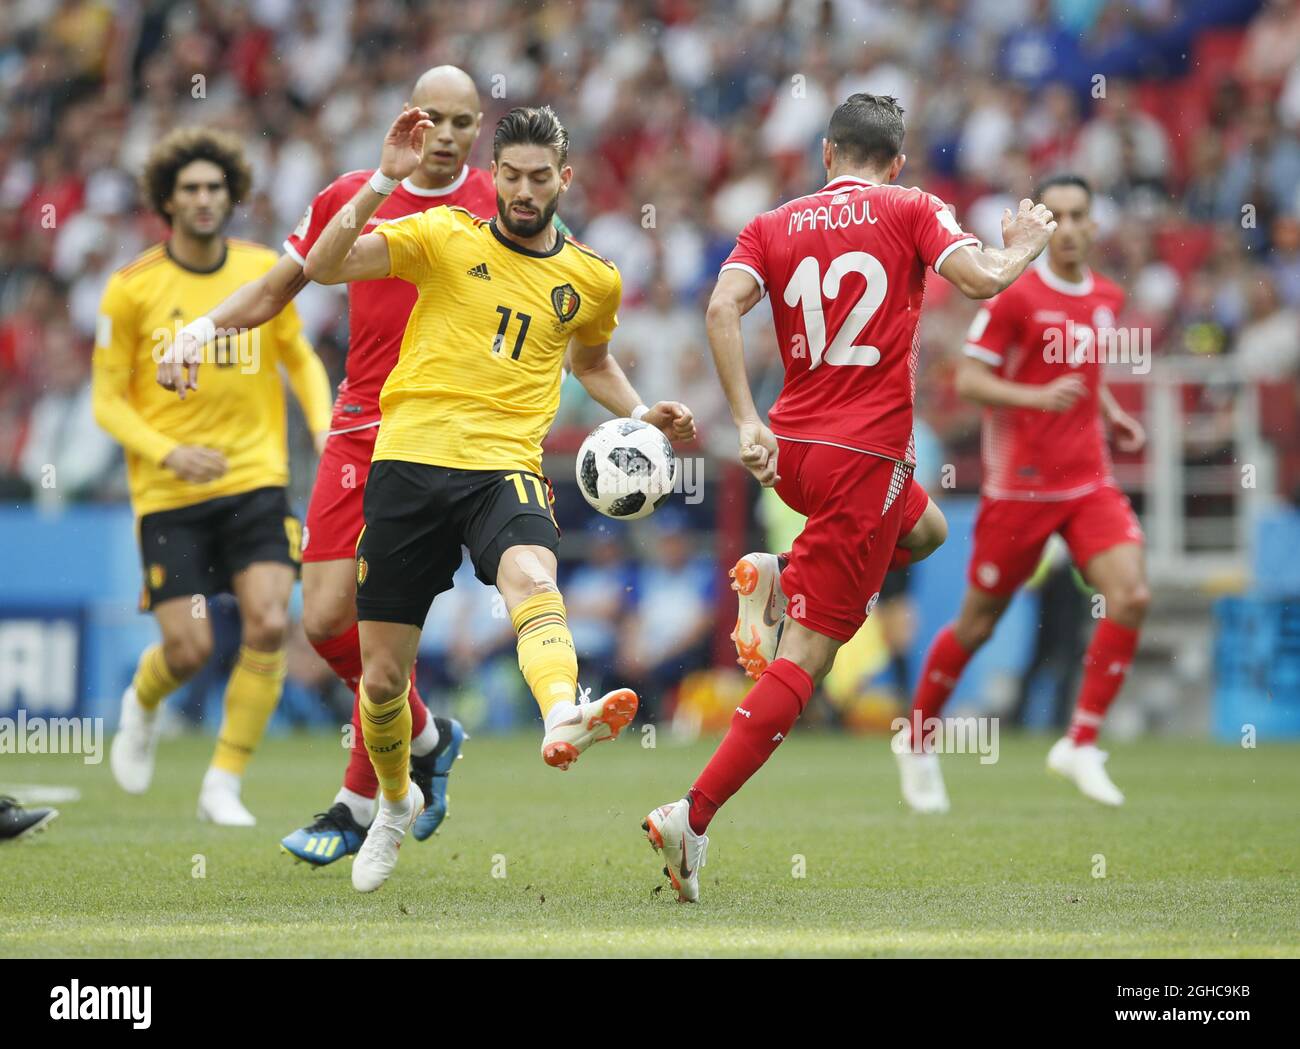 Yannick Carrasco of Belgium flicks the ball past Ali Maaloul of Tunisia during the FIFA World Cup 2018 Group G match at the Spartak Stadium, Moscow. Picture date 23rd June 2018. Picture credit should read: David Klein/Sportimage via PA Images Stock Photo